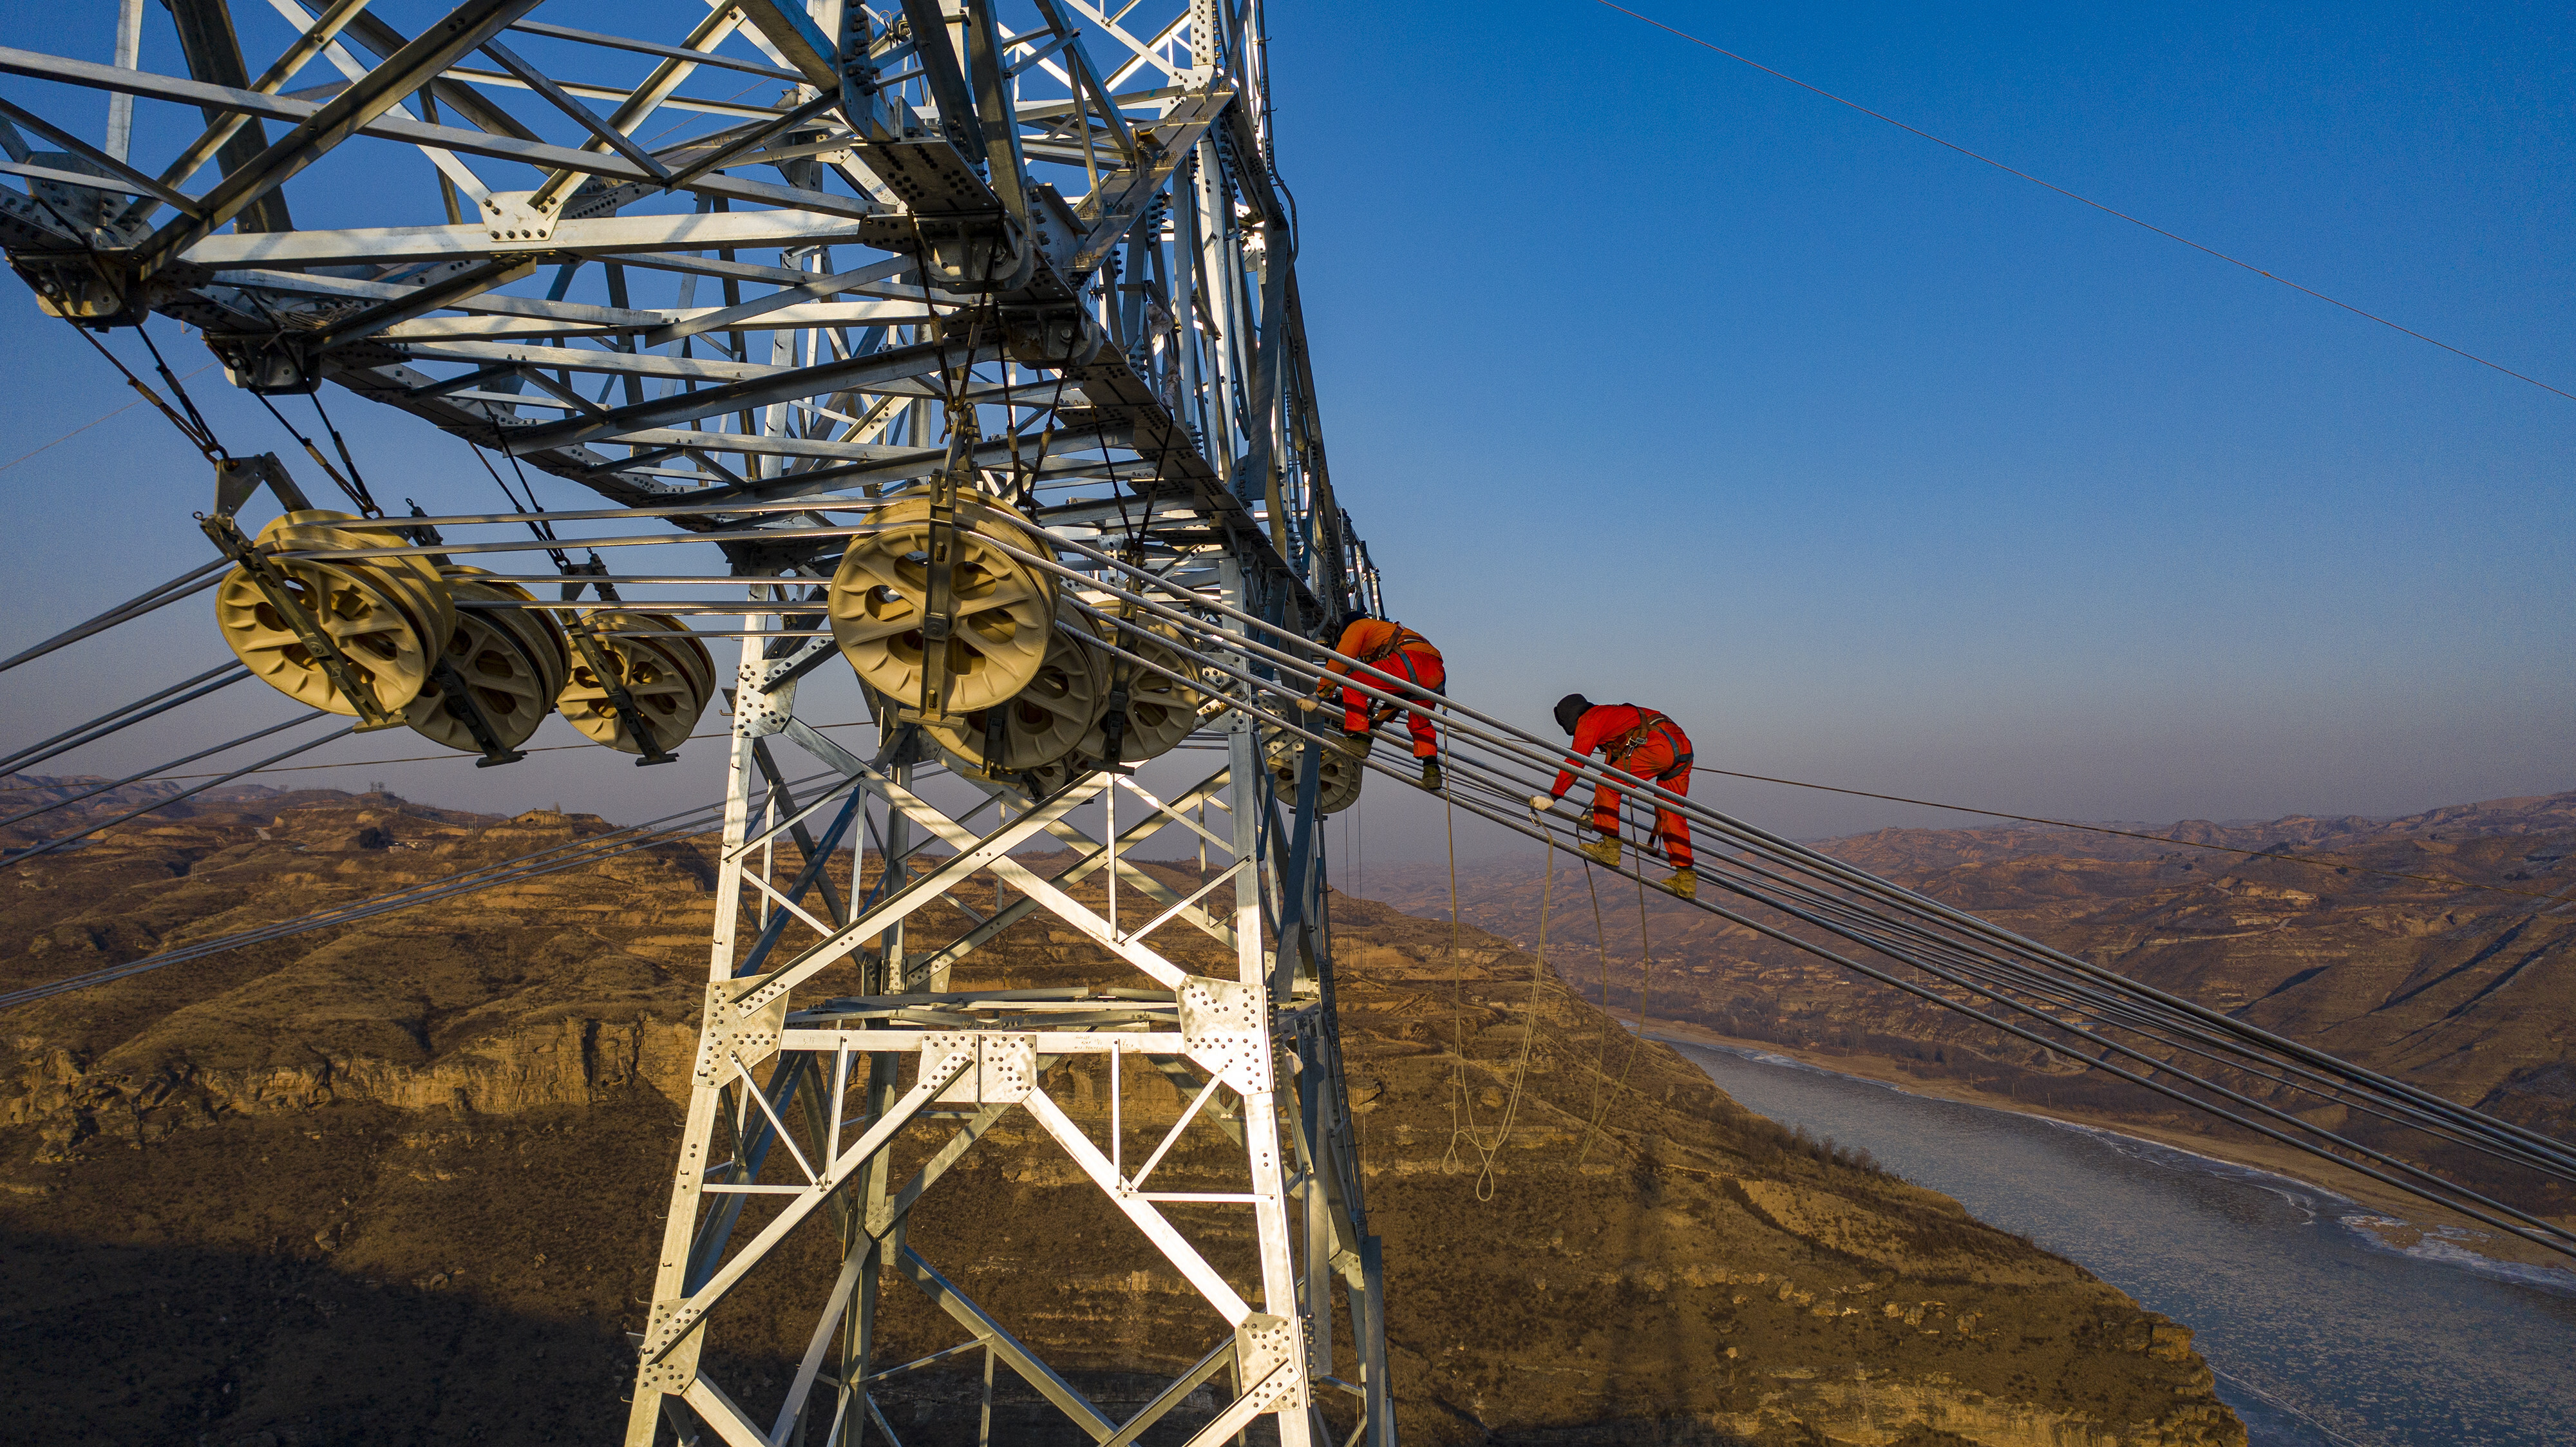 Electricians install electric wires on a transmission tower on the banks of China’s Yellow River during construction of an 800-kilovolt ultra-high voltage (UHV) power line on December 20, 2020 in Qingjian County, Shaanxi province, China. Photo: VCG via Getty Images